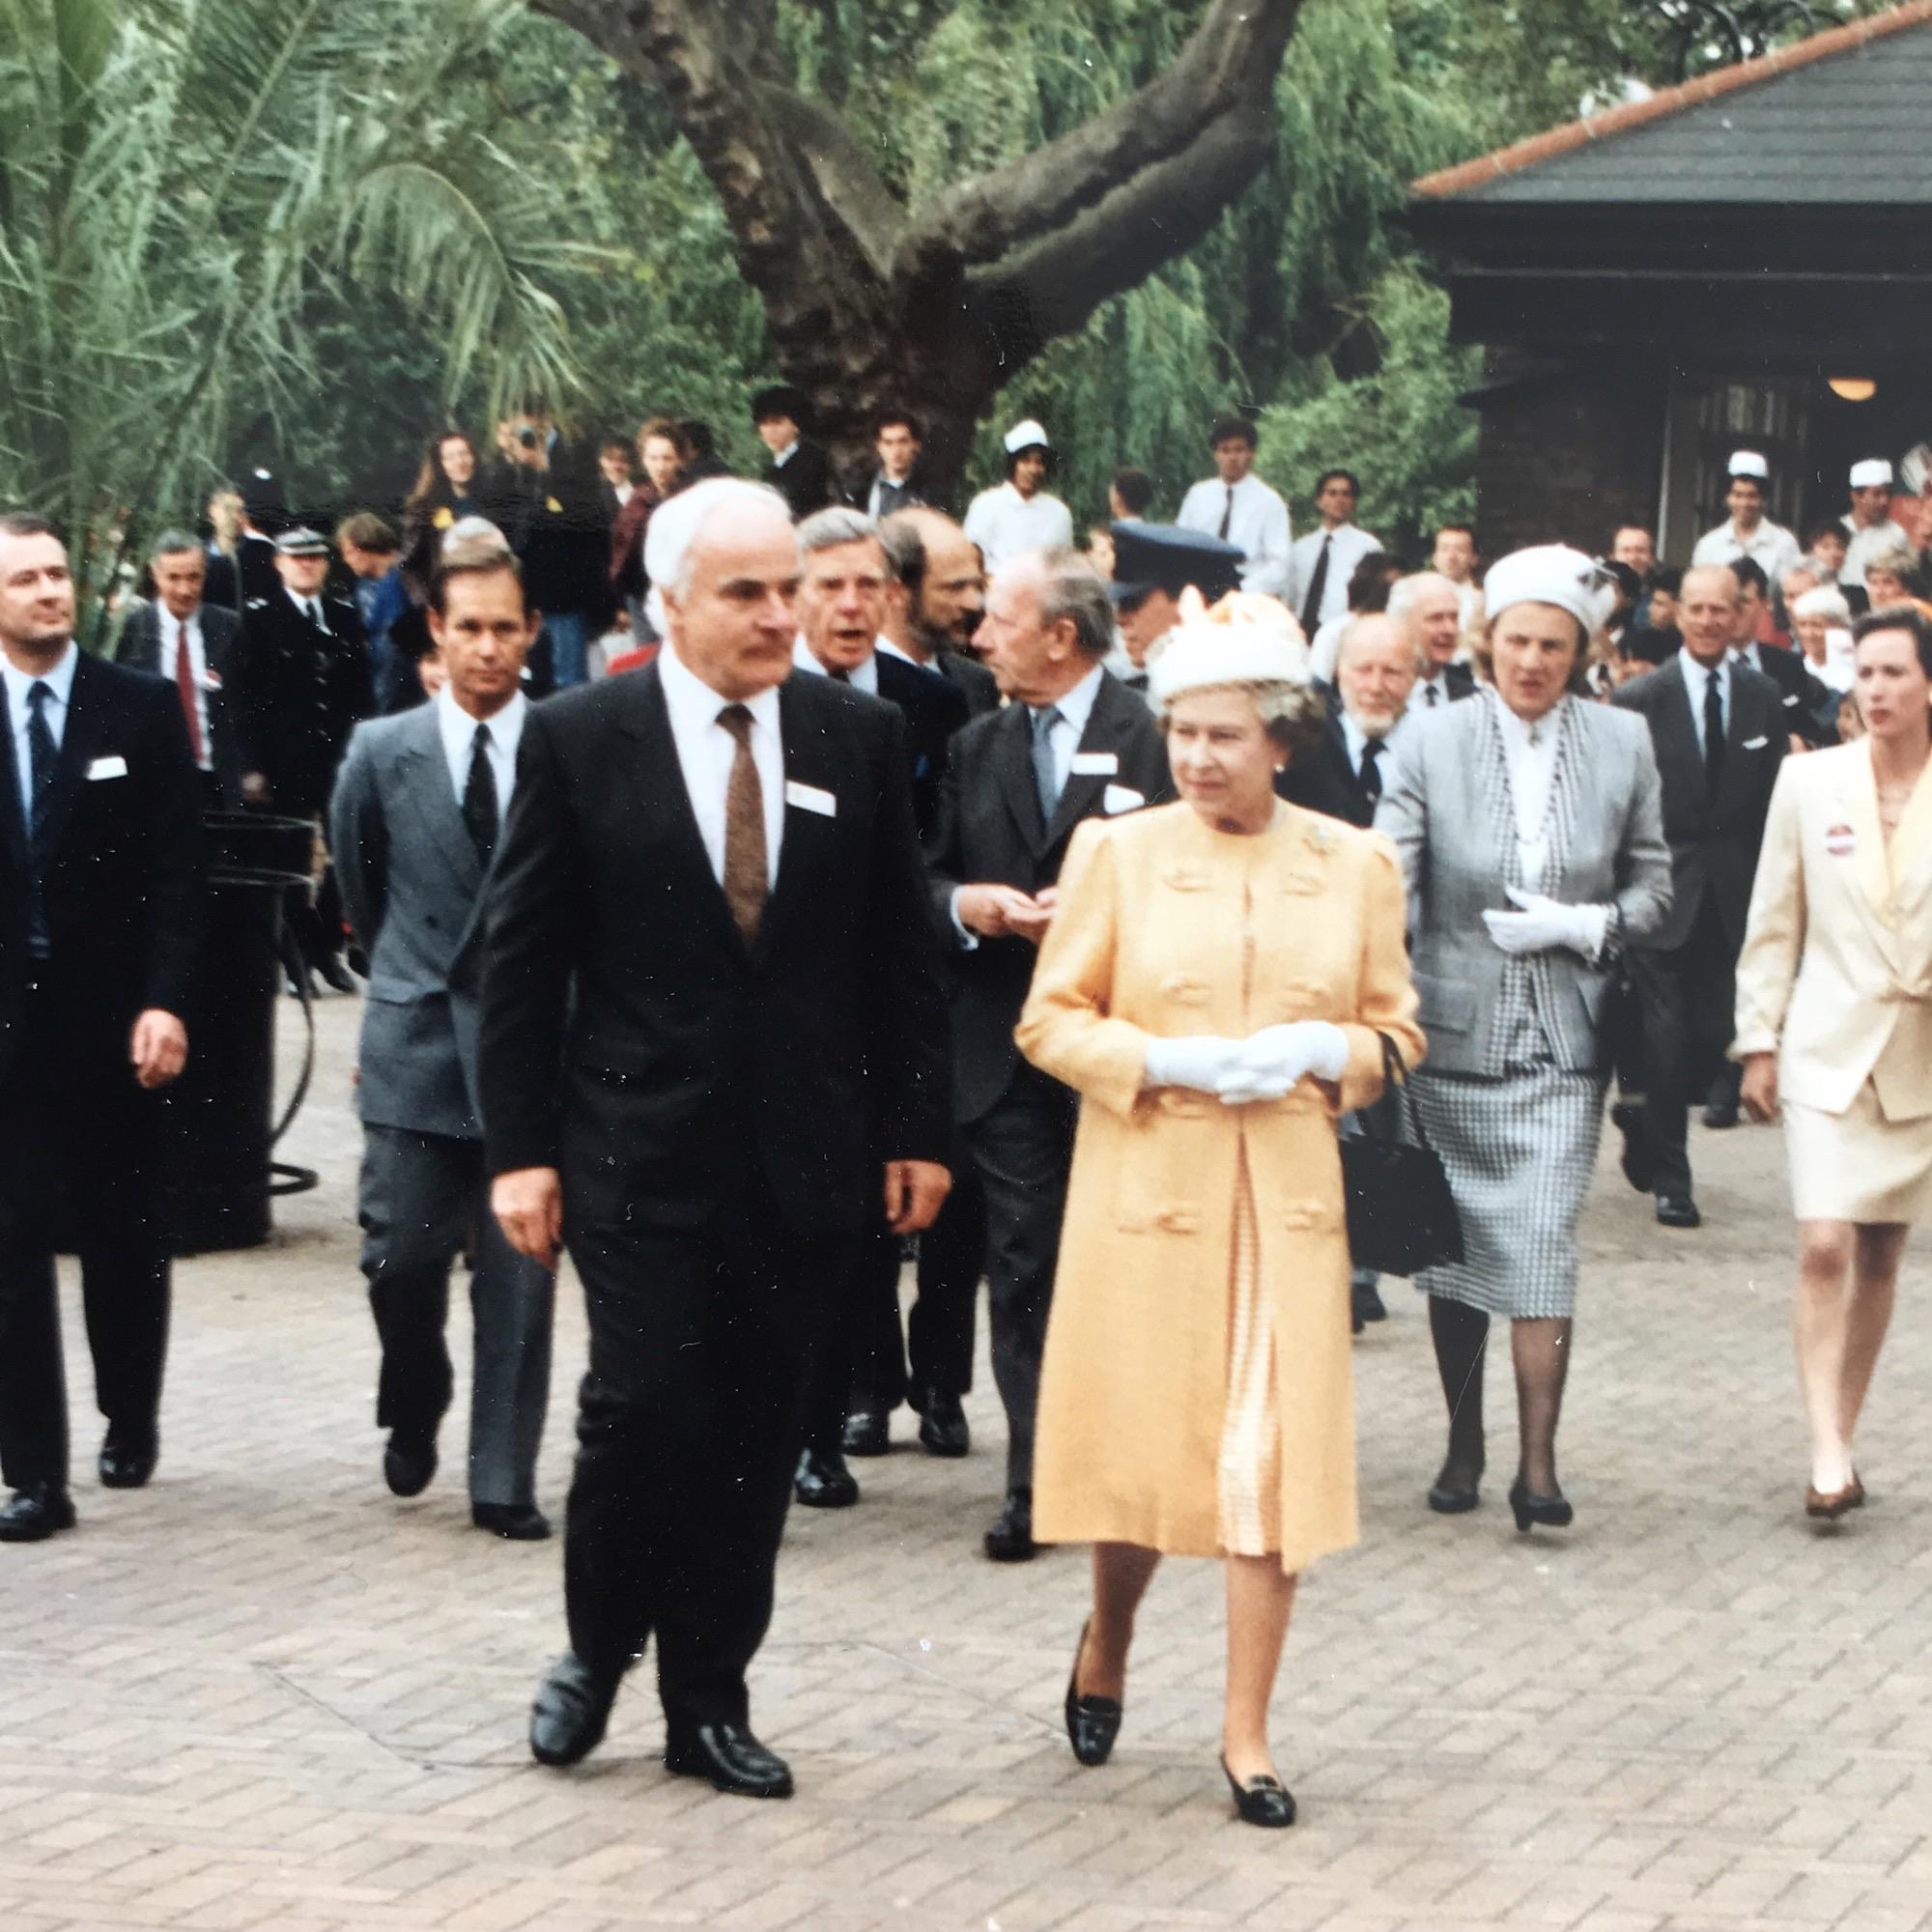 Professor Avrion Mitchison with Her Majesty Queen Elizabeth II at the ZSL London Zoo when he led the Zoological Society of London